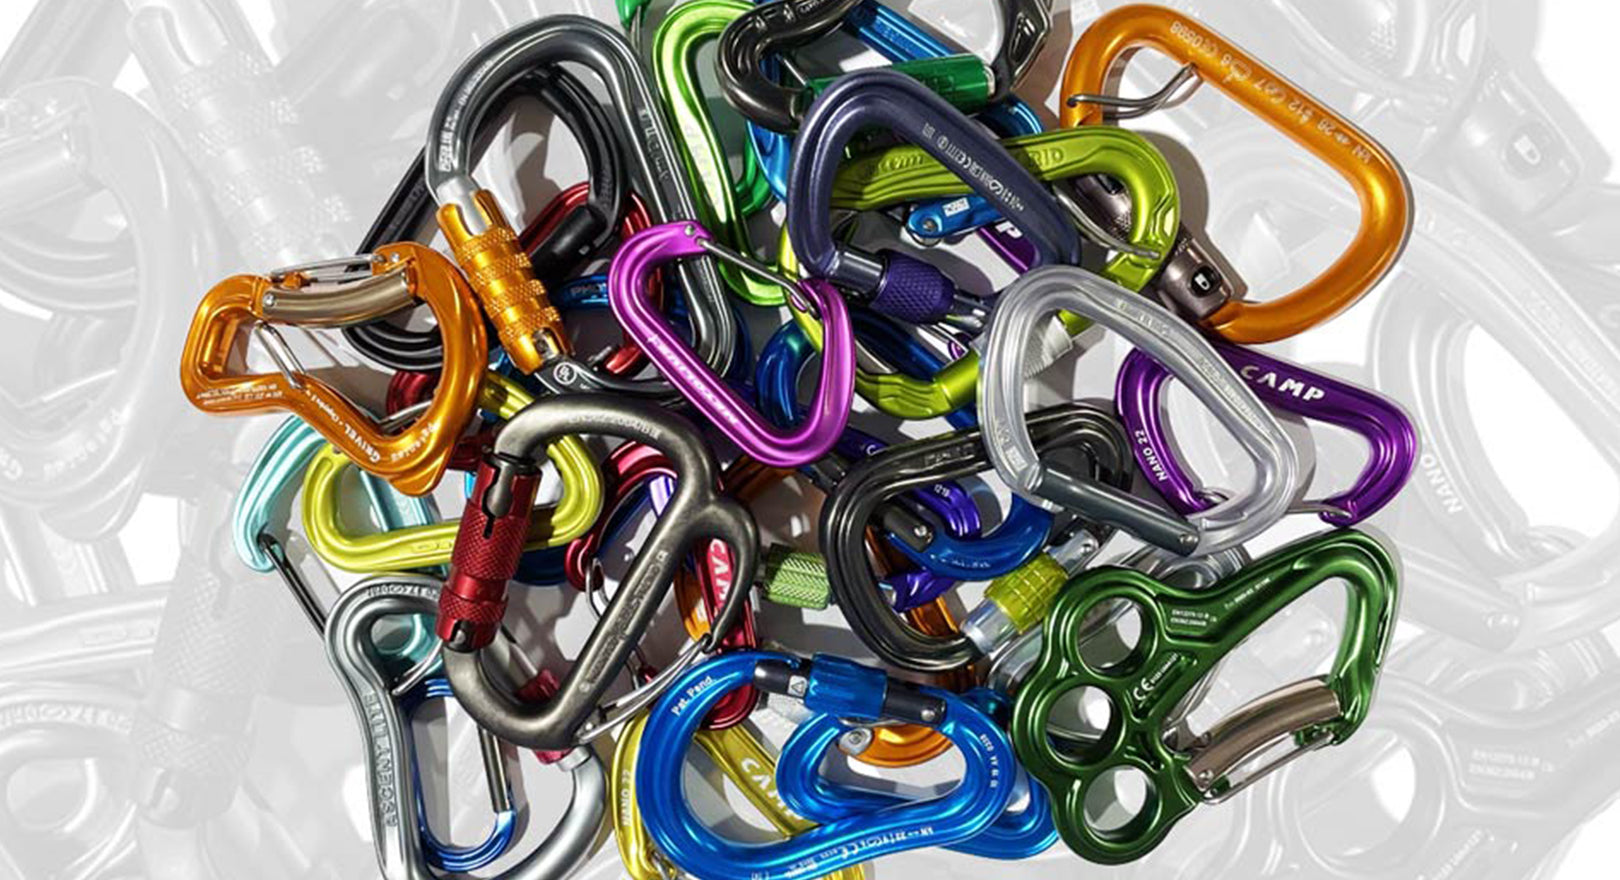 News - Petzl Carabiner how to guide: choosing and using the right